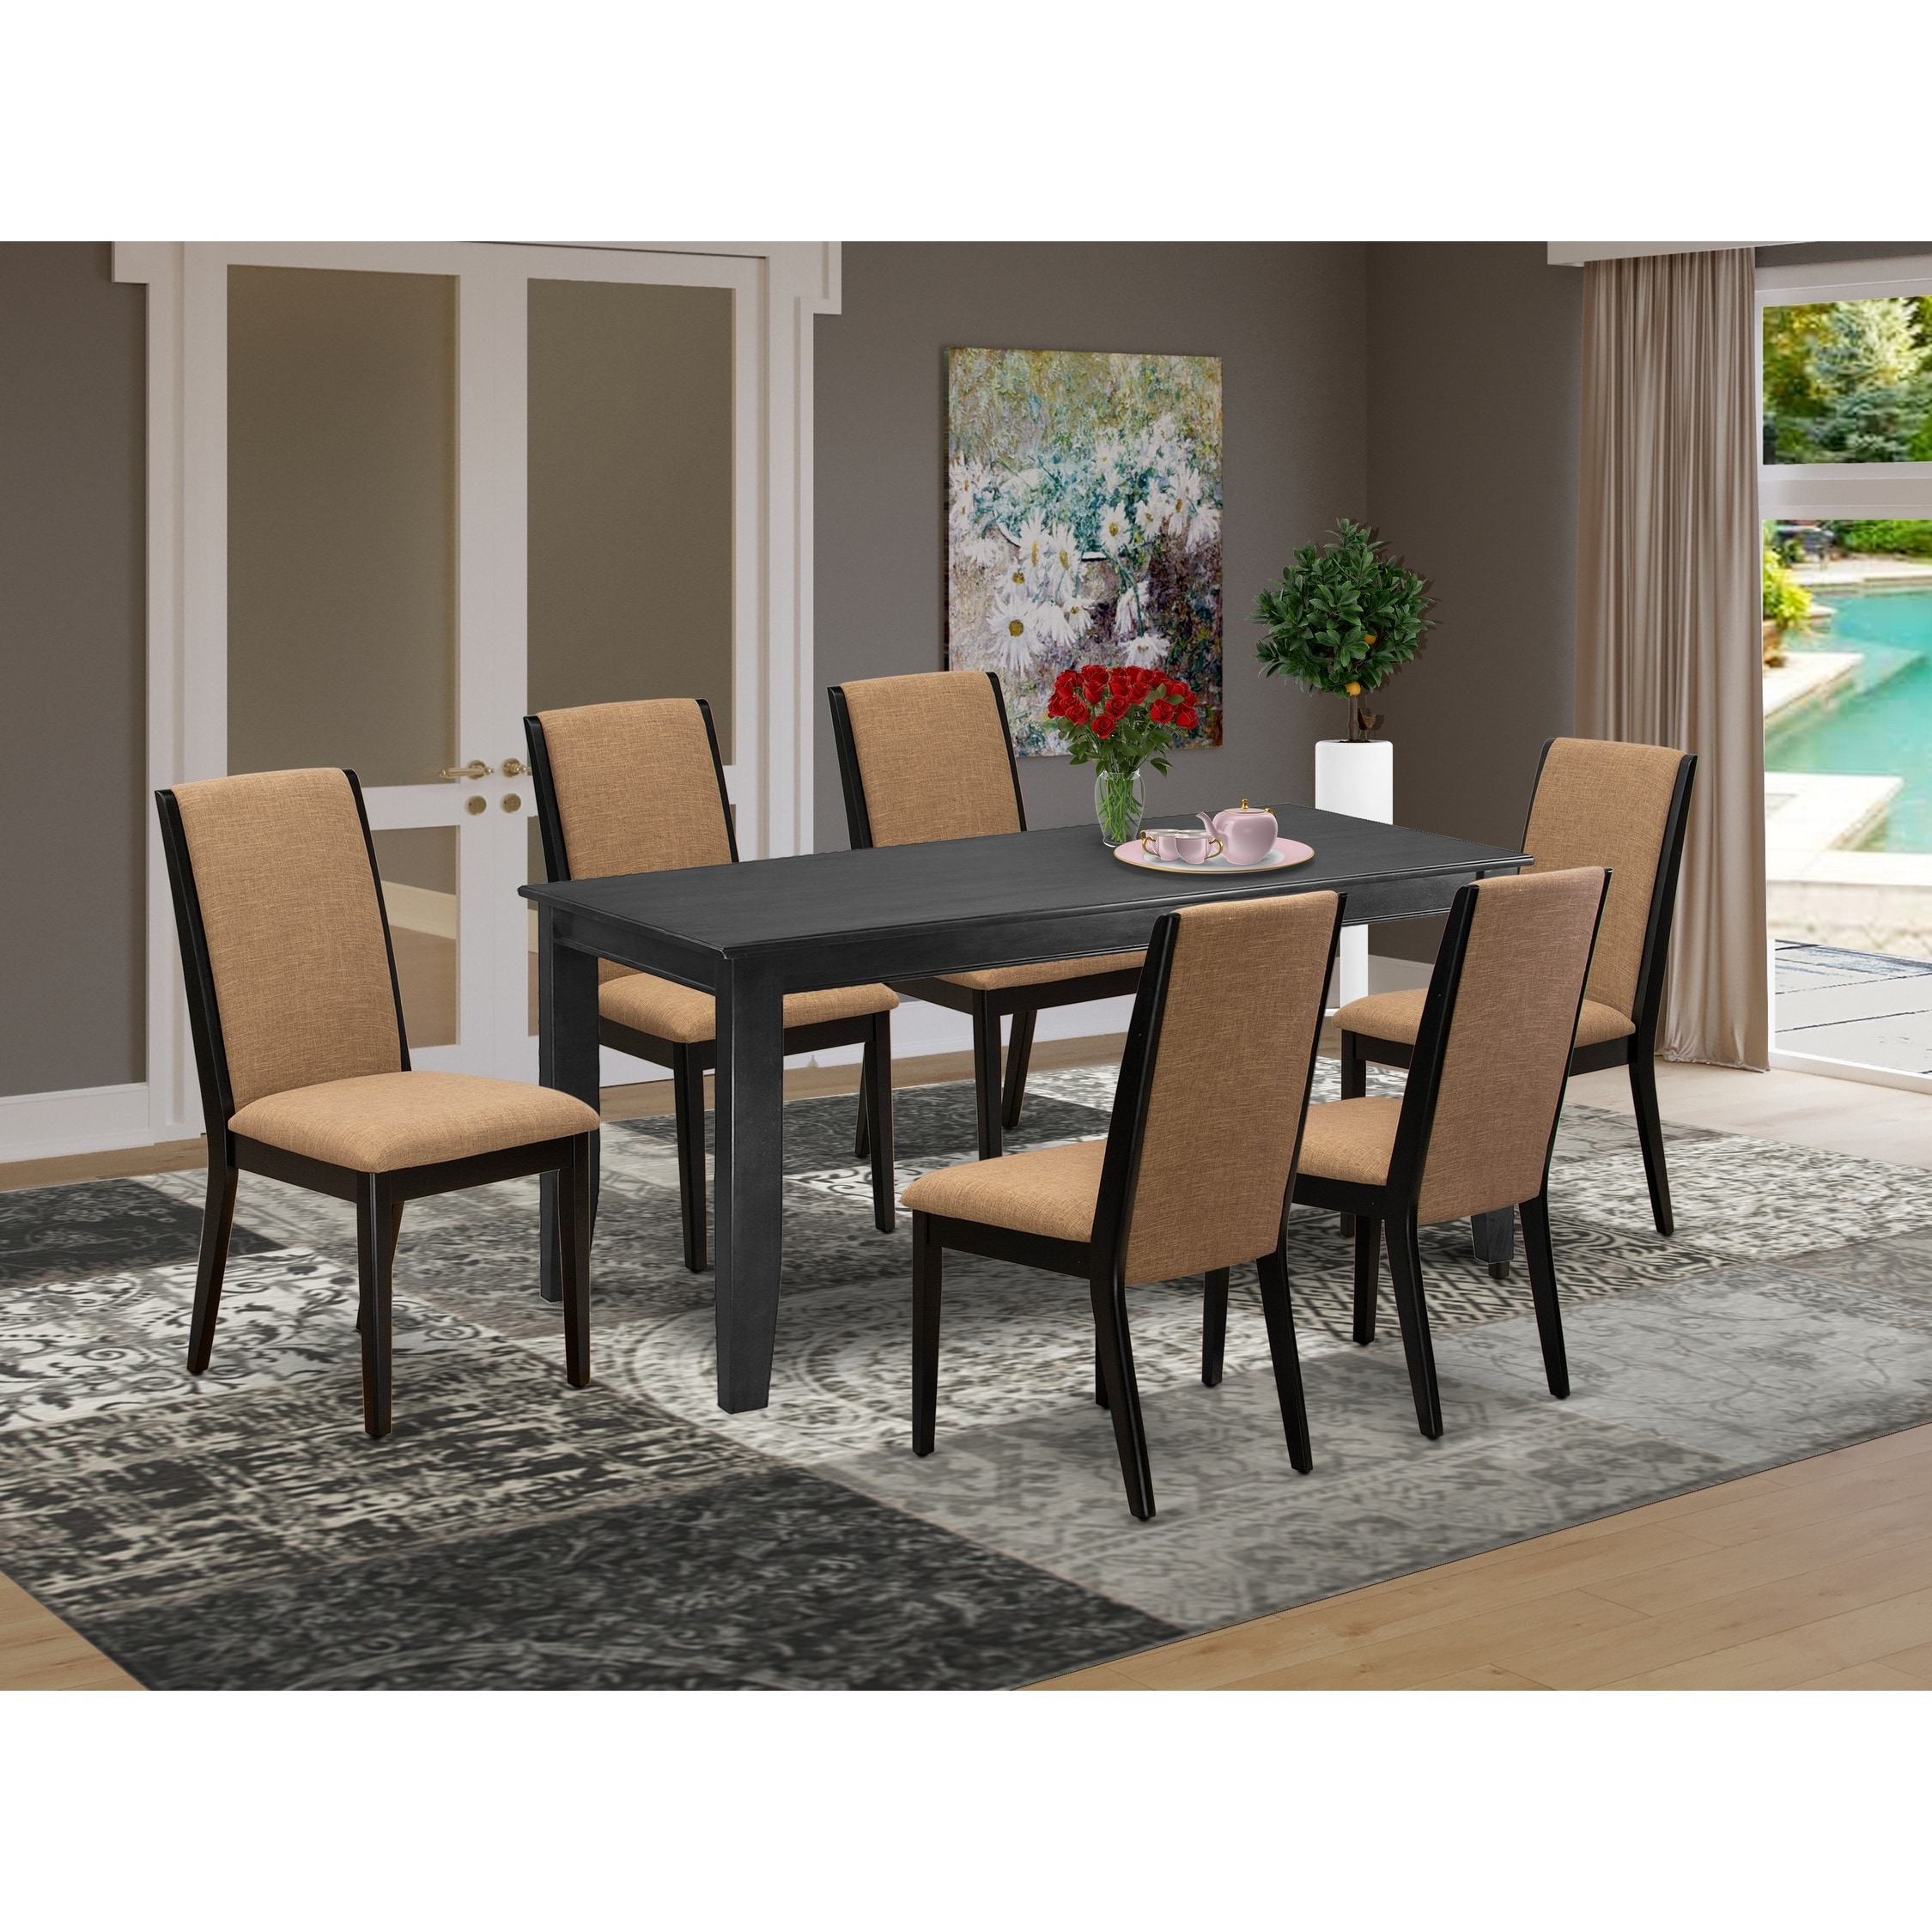 East West Furniture 7 Piece Dining Room Table Set- A Kitchen Table And 6 Linen Fabric Dining Chairs  (finish Options)